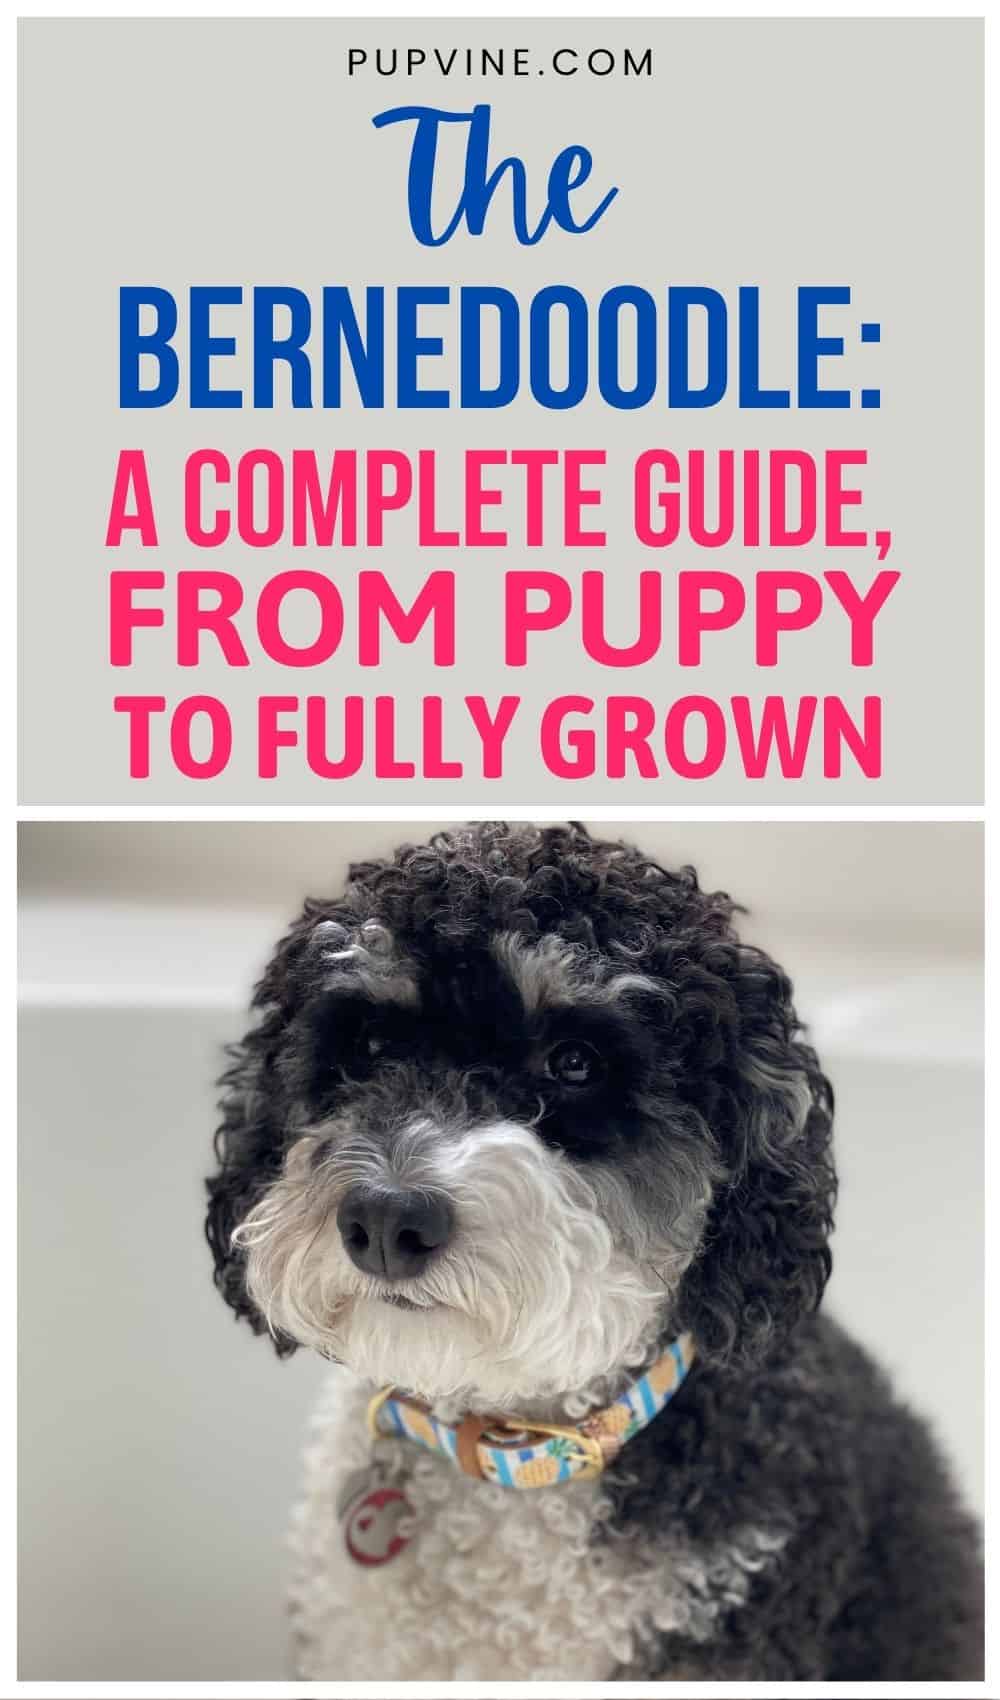 The Bernedoodle: A Complete Guide, From Puppy To Fully Grown